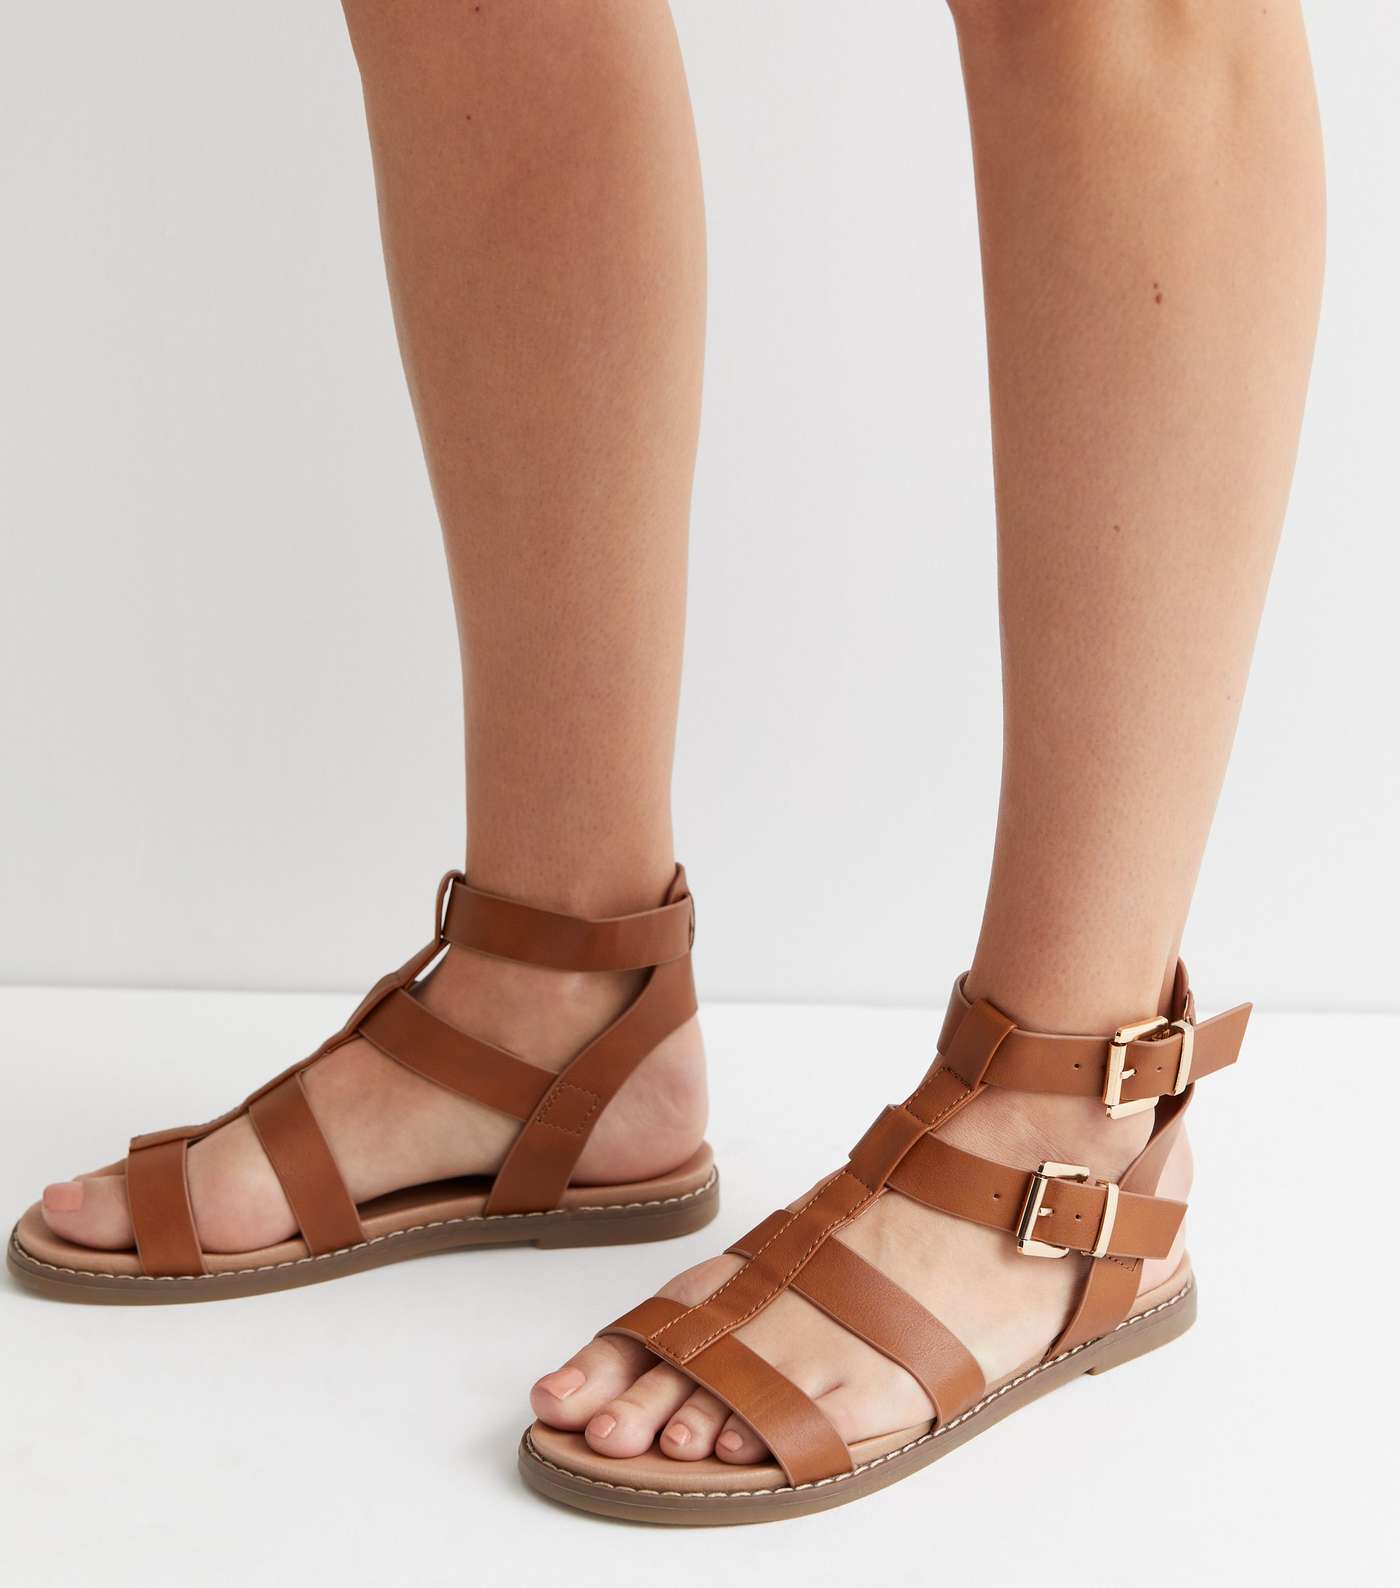 Tan Leather-Look Gladiator Footbed Sandals Image 2